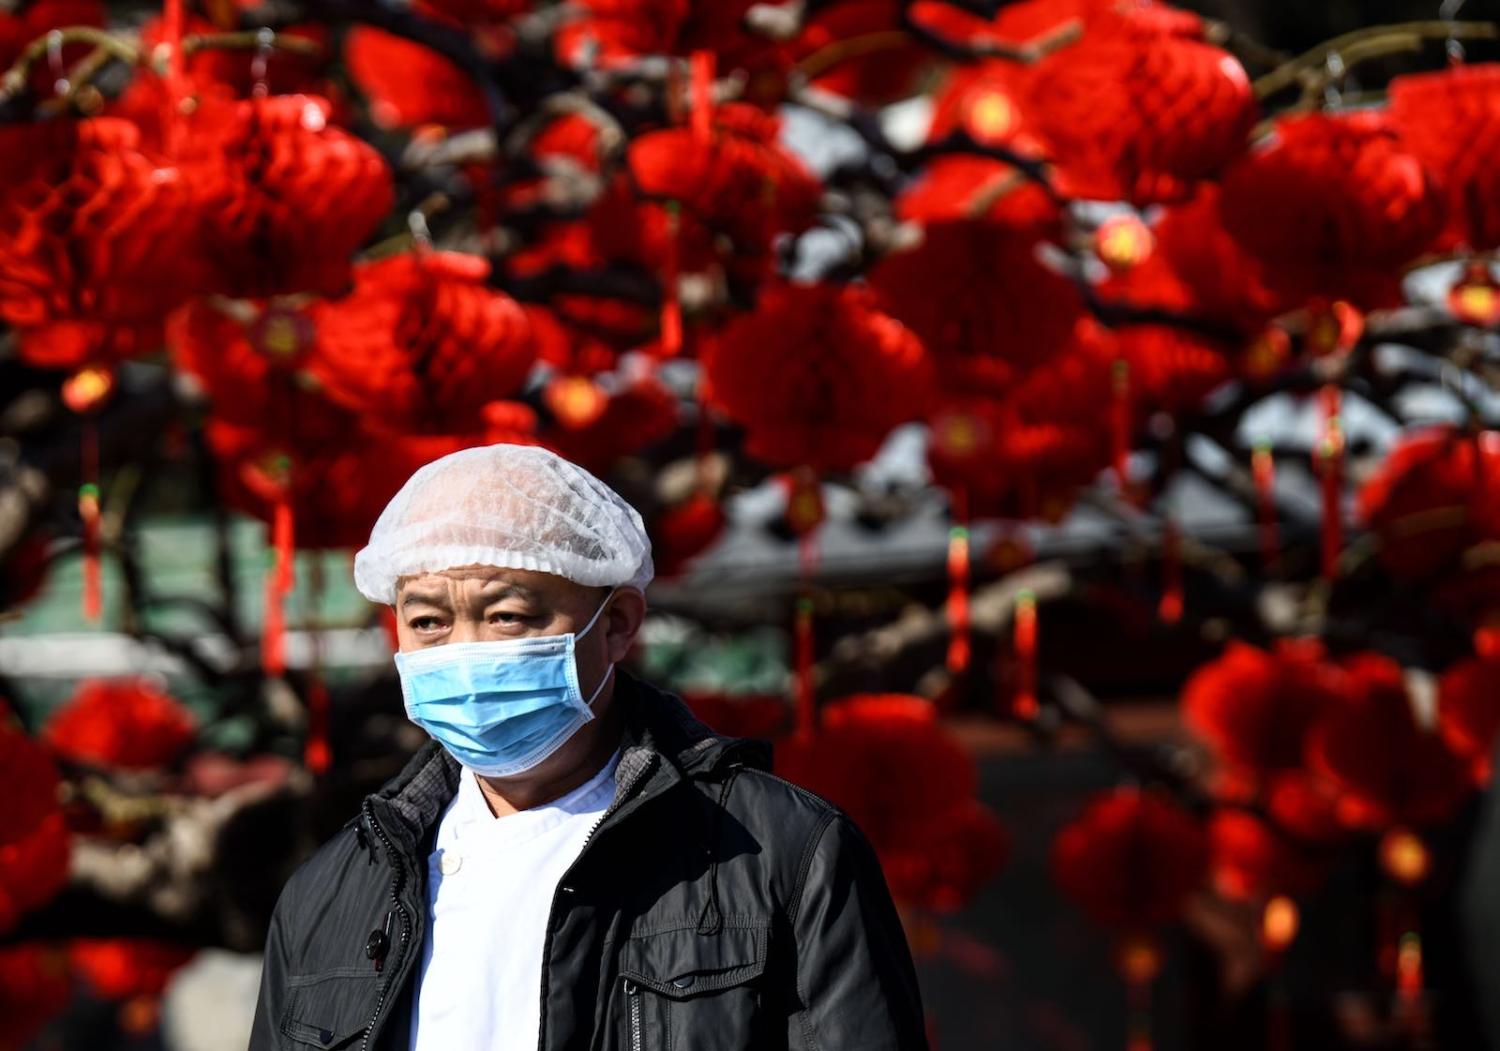 The difficulties of managing a public health crisis have been accentuated by timing, on the eve of Lunar New Year (Photo: Noel Celis/AFP/Getty Images)